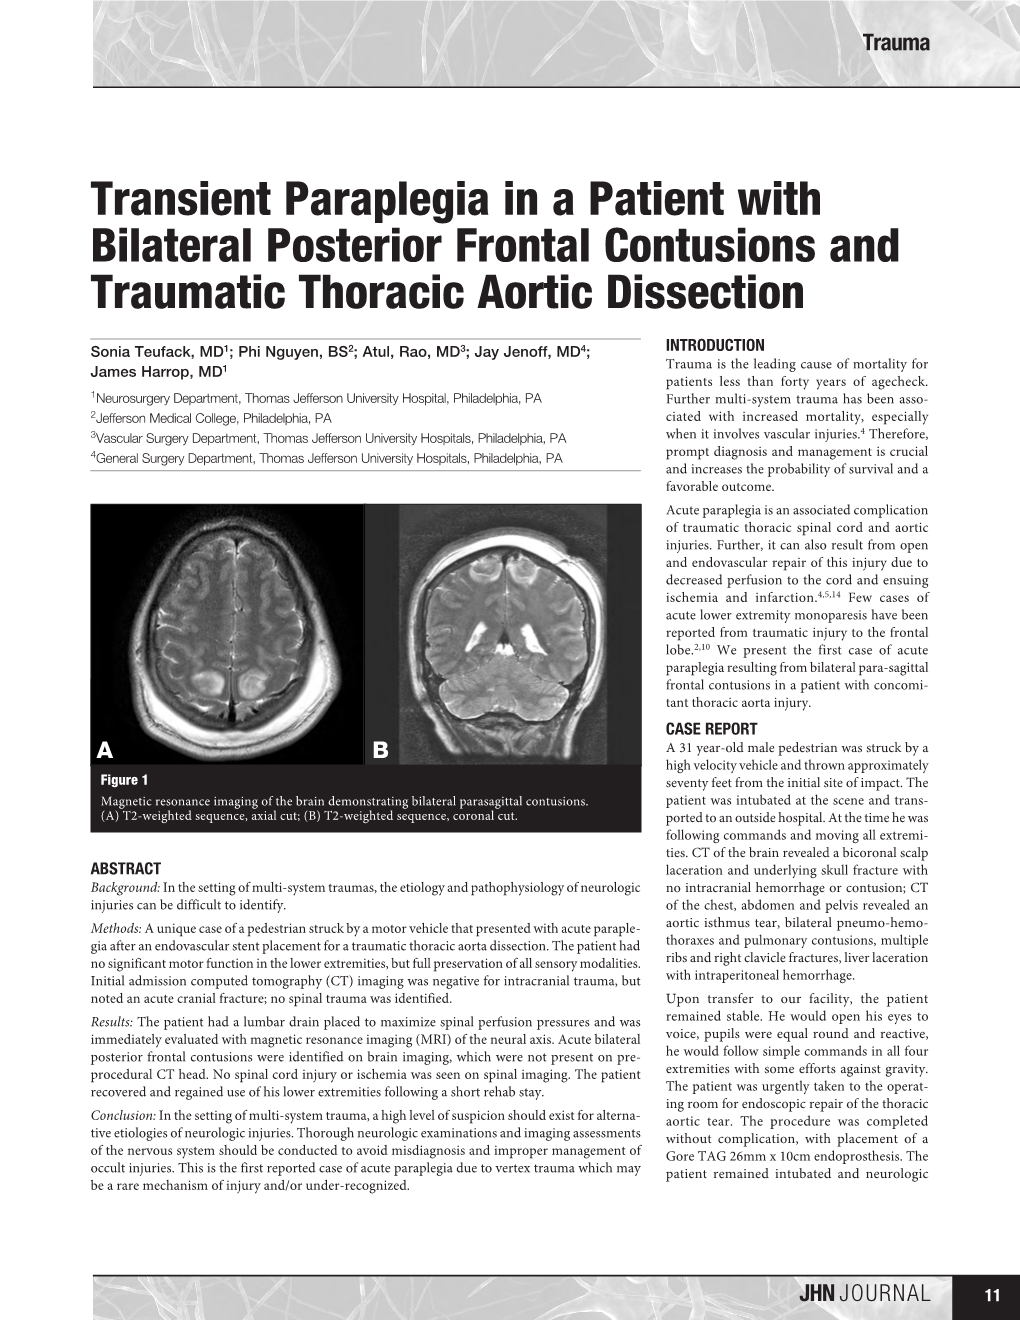 Transient Paraplegia in a Patient with Bilateral Posterior Frontal Contusions and Traumatic Thoracic Aortic Dissection